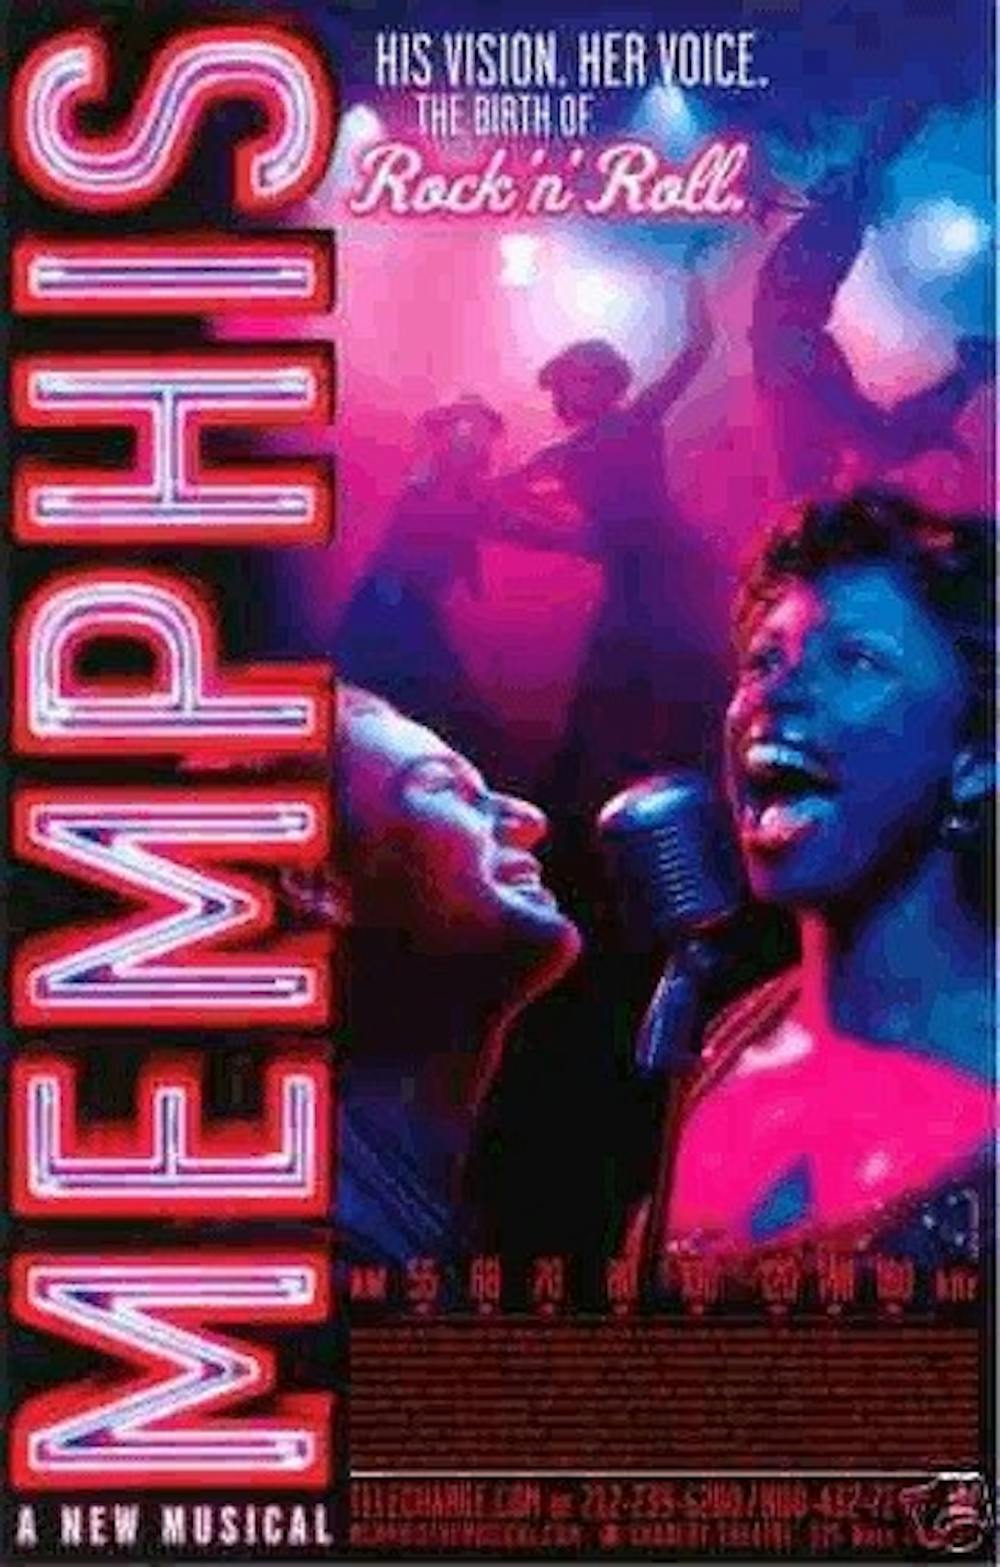 The official poster for the Broadway musical, Memphis